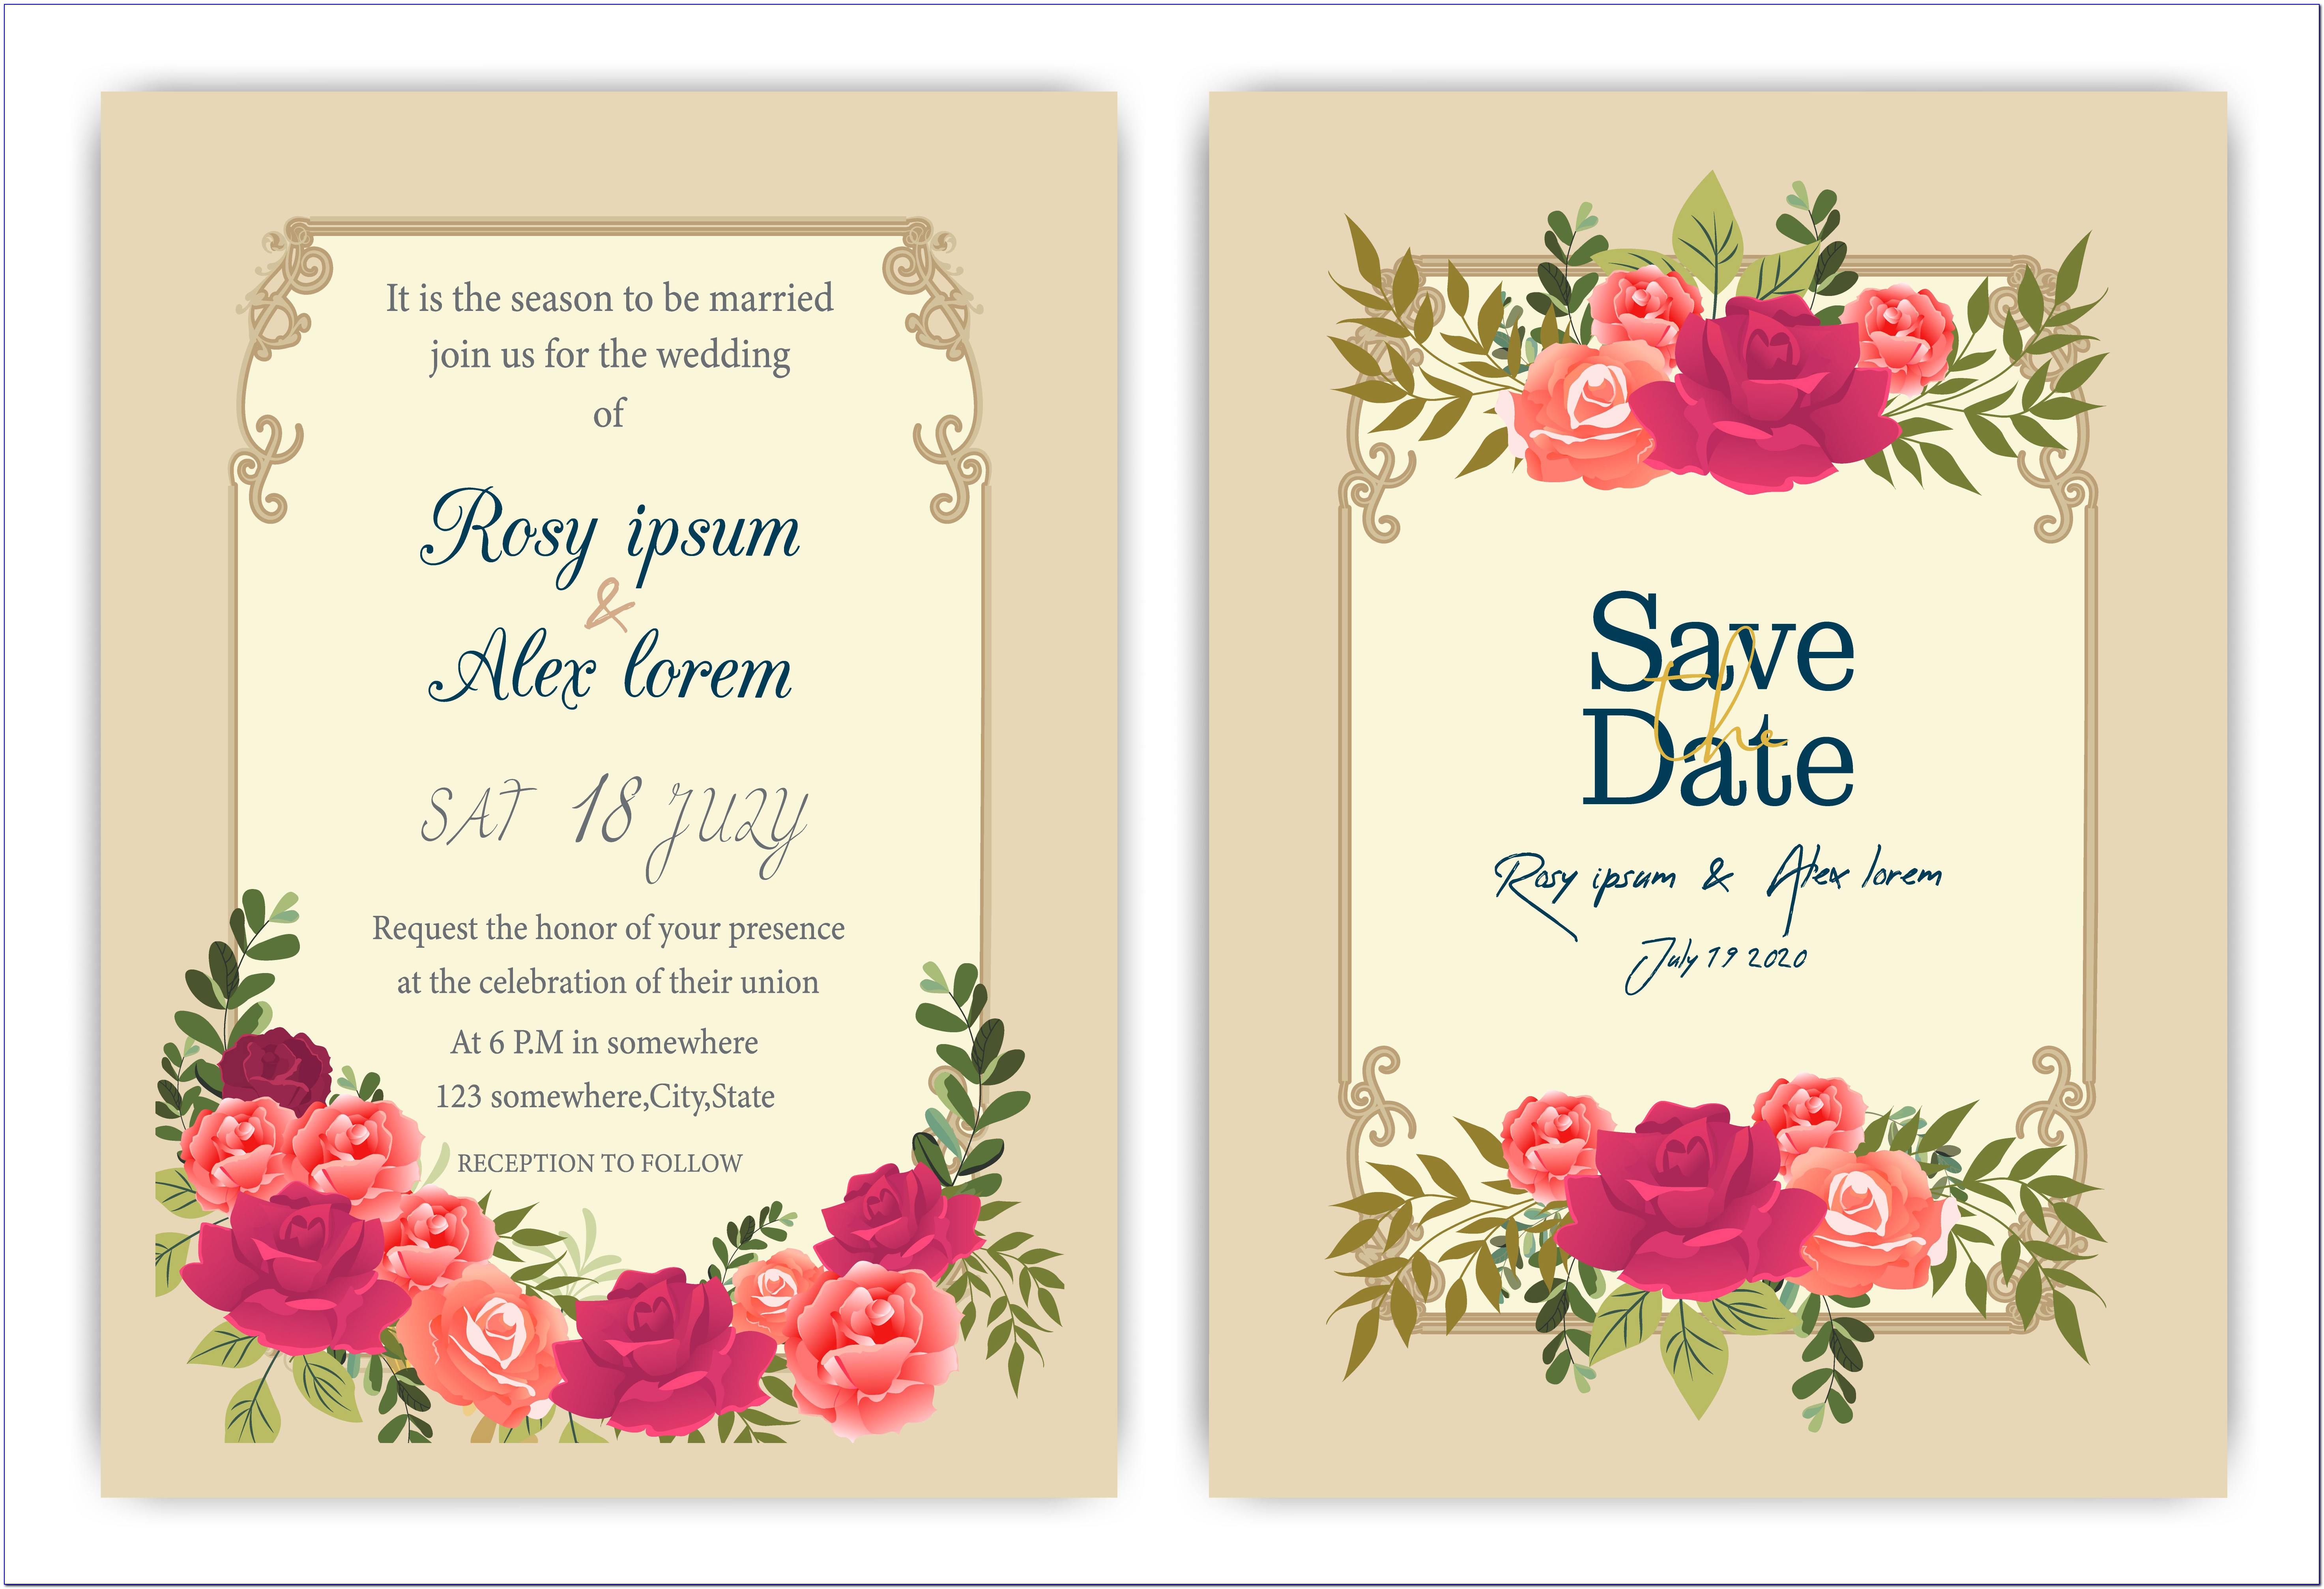 Engagement Invitation Images Free Download